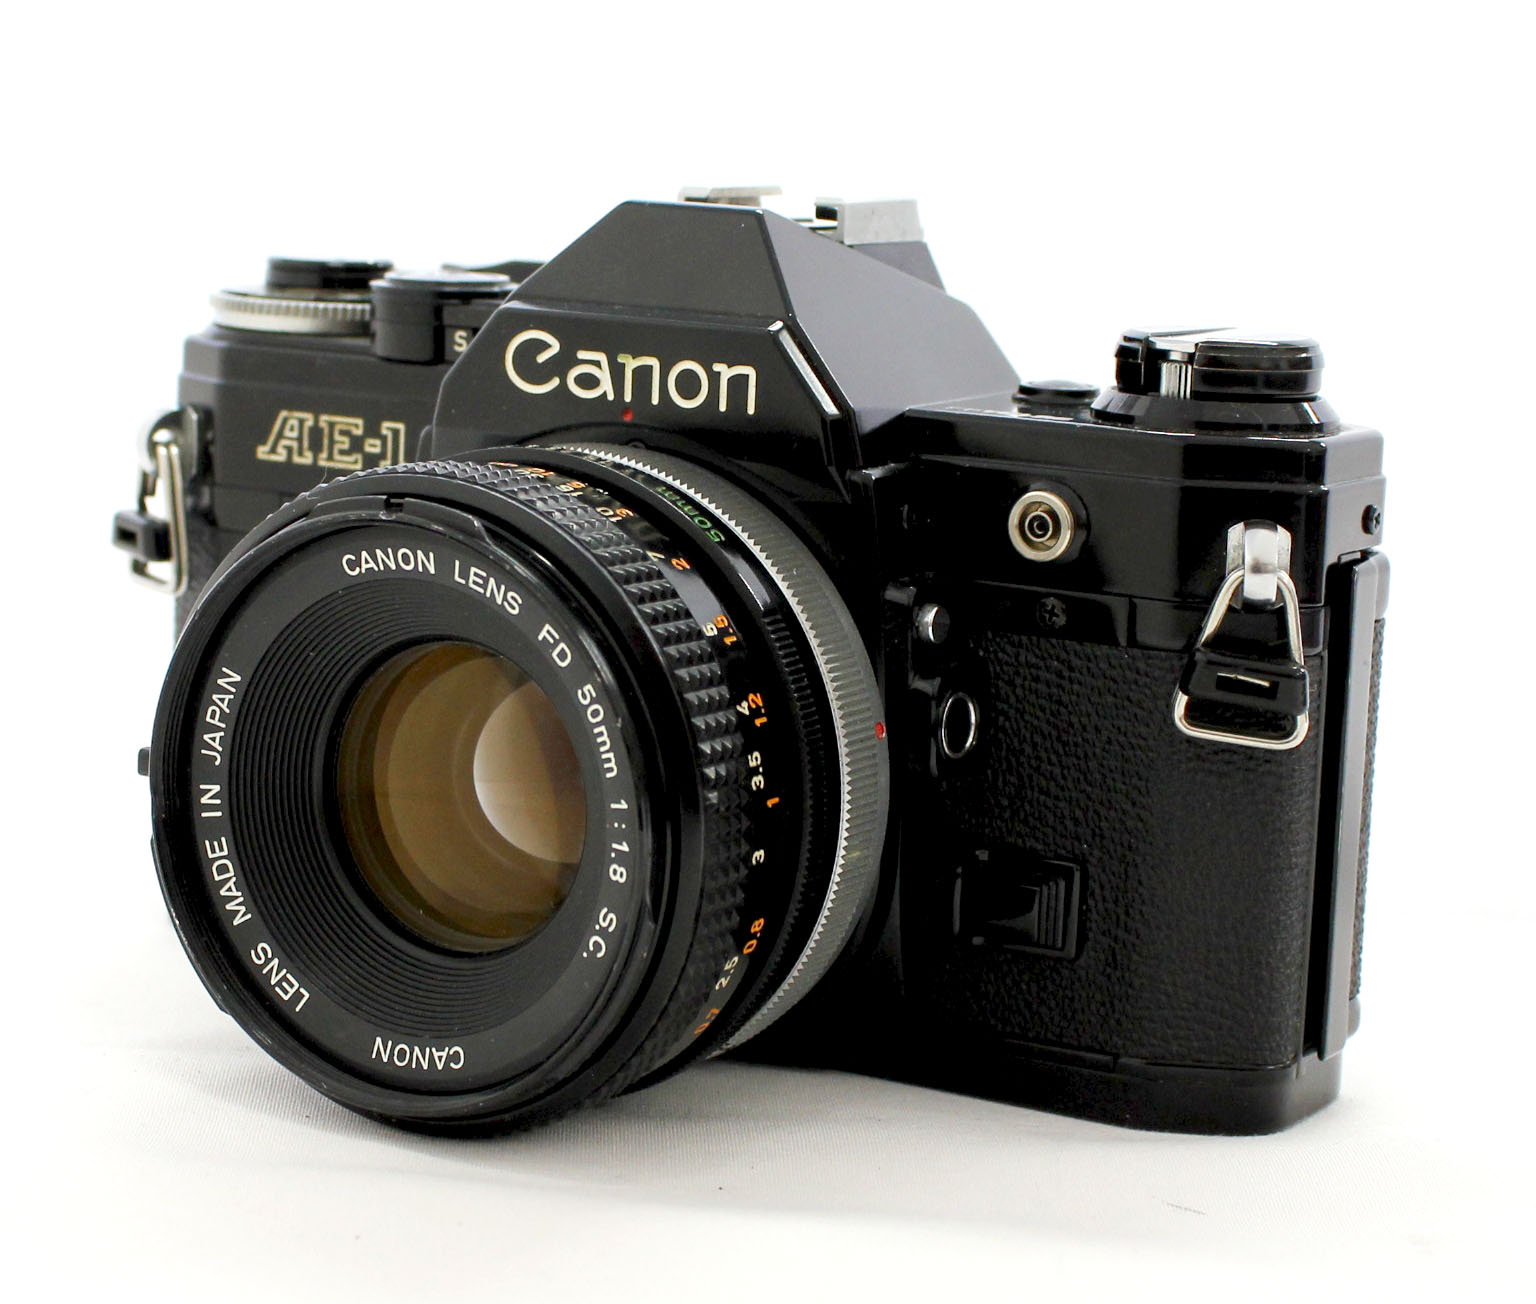 Japan Used Camera Shop | Canon AE-1 35mm SLR Film Camera with FD 50mm F/1.8 S.C. Lens from Japan